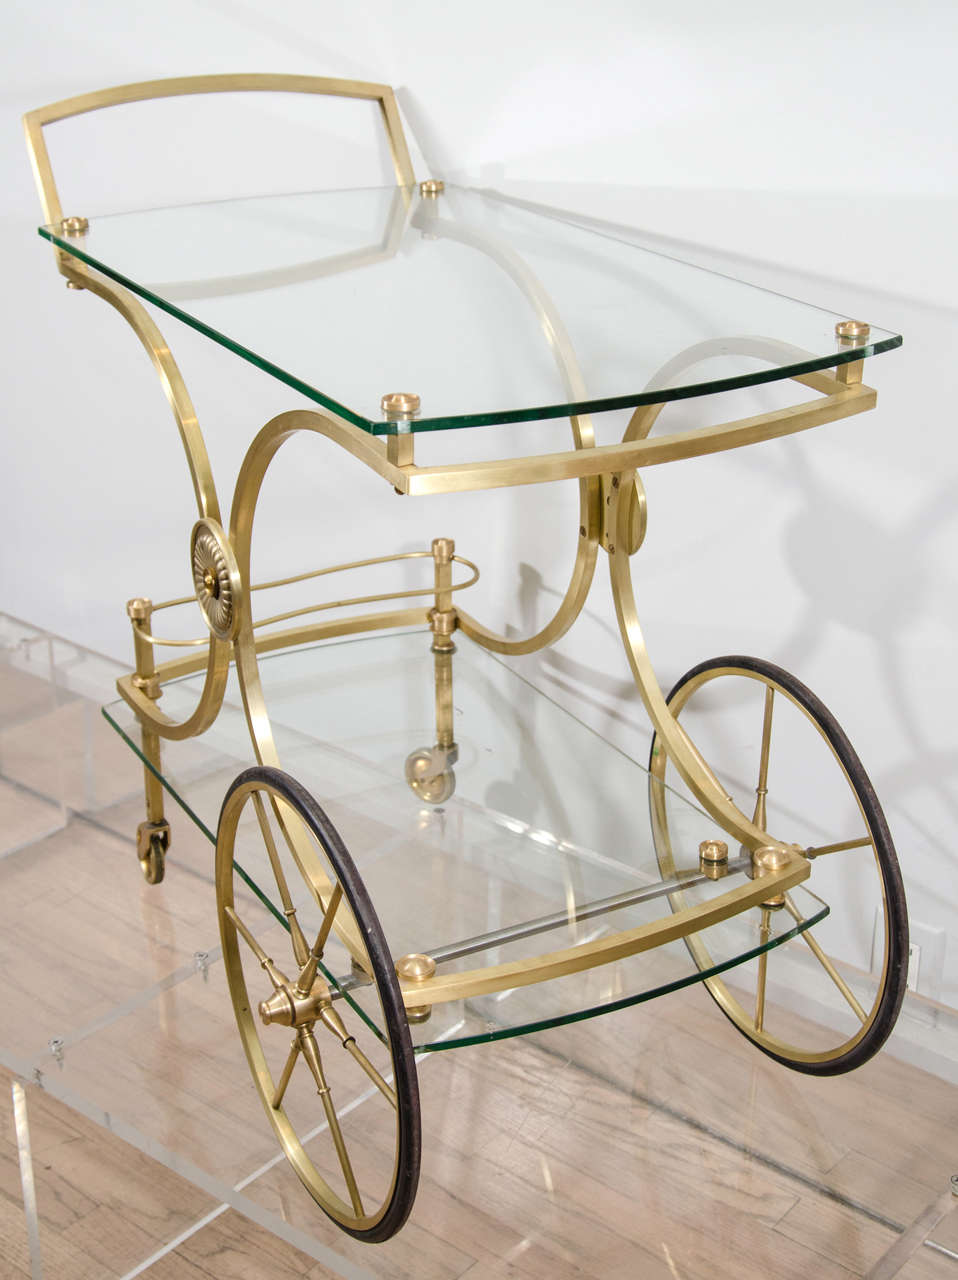 Elegant barcart finished in satin gilt brass with elevated glass tops.